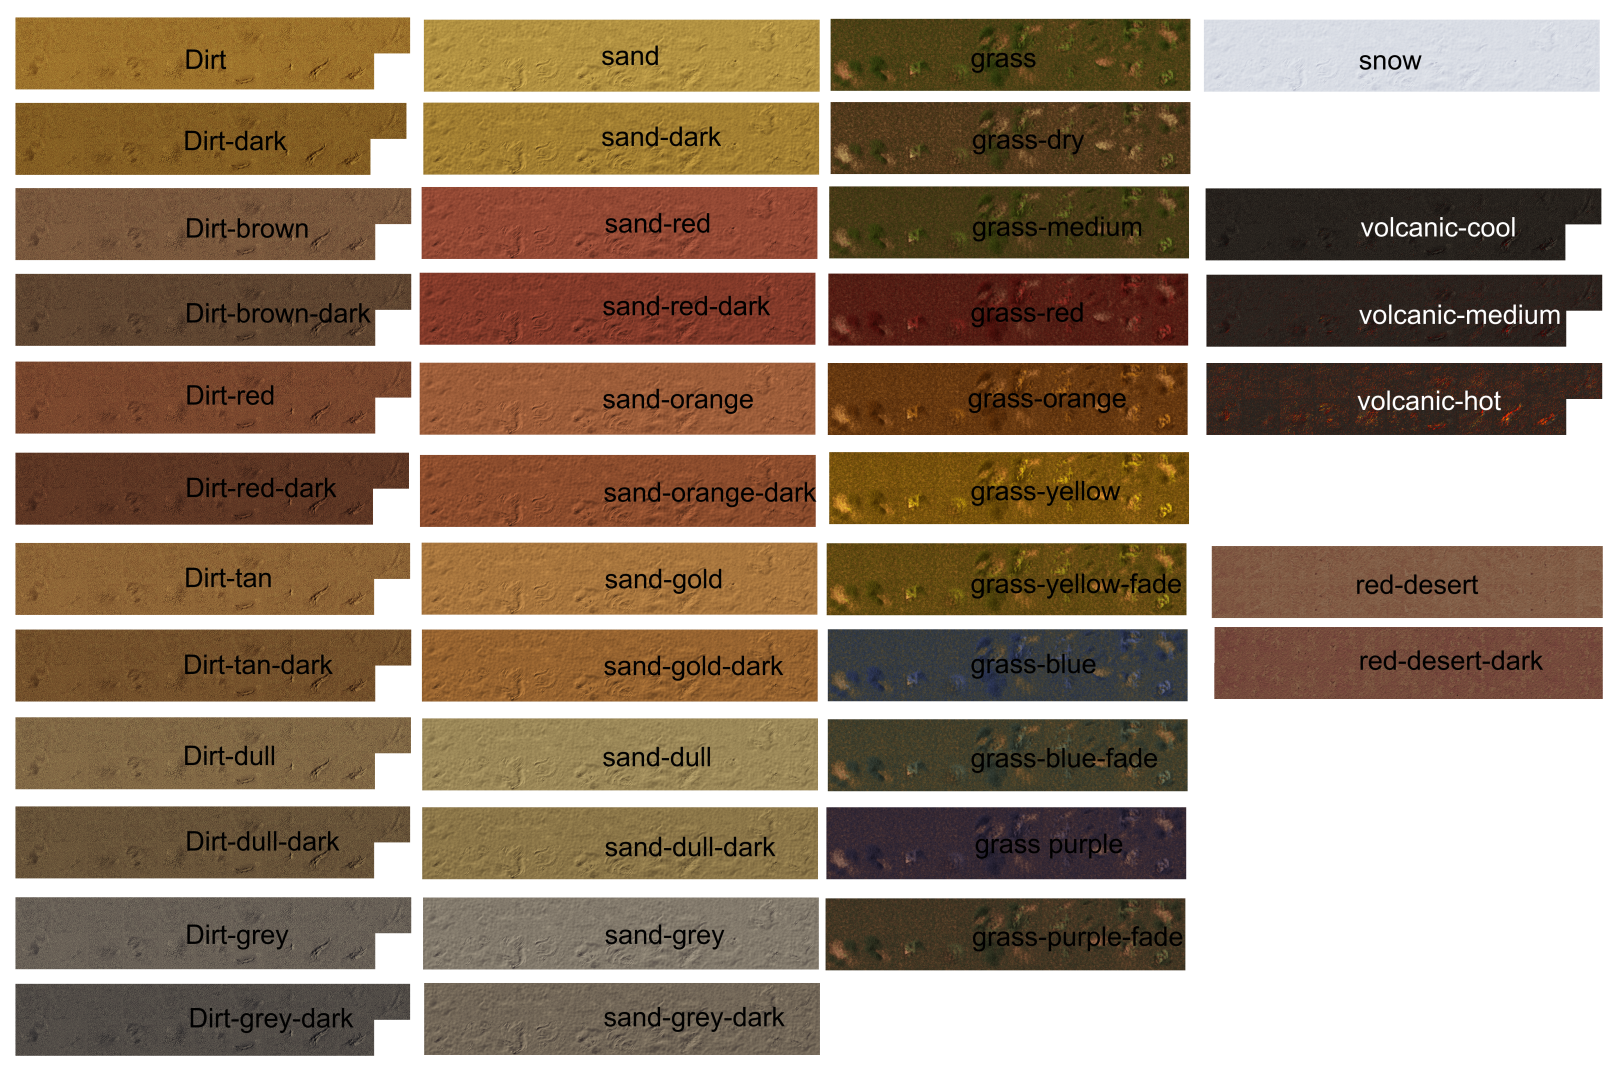 alien biomes overview.png